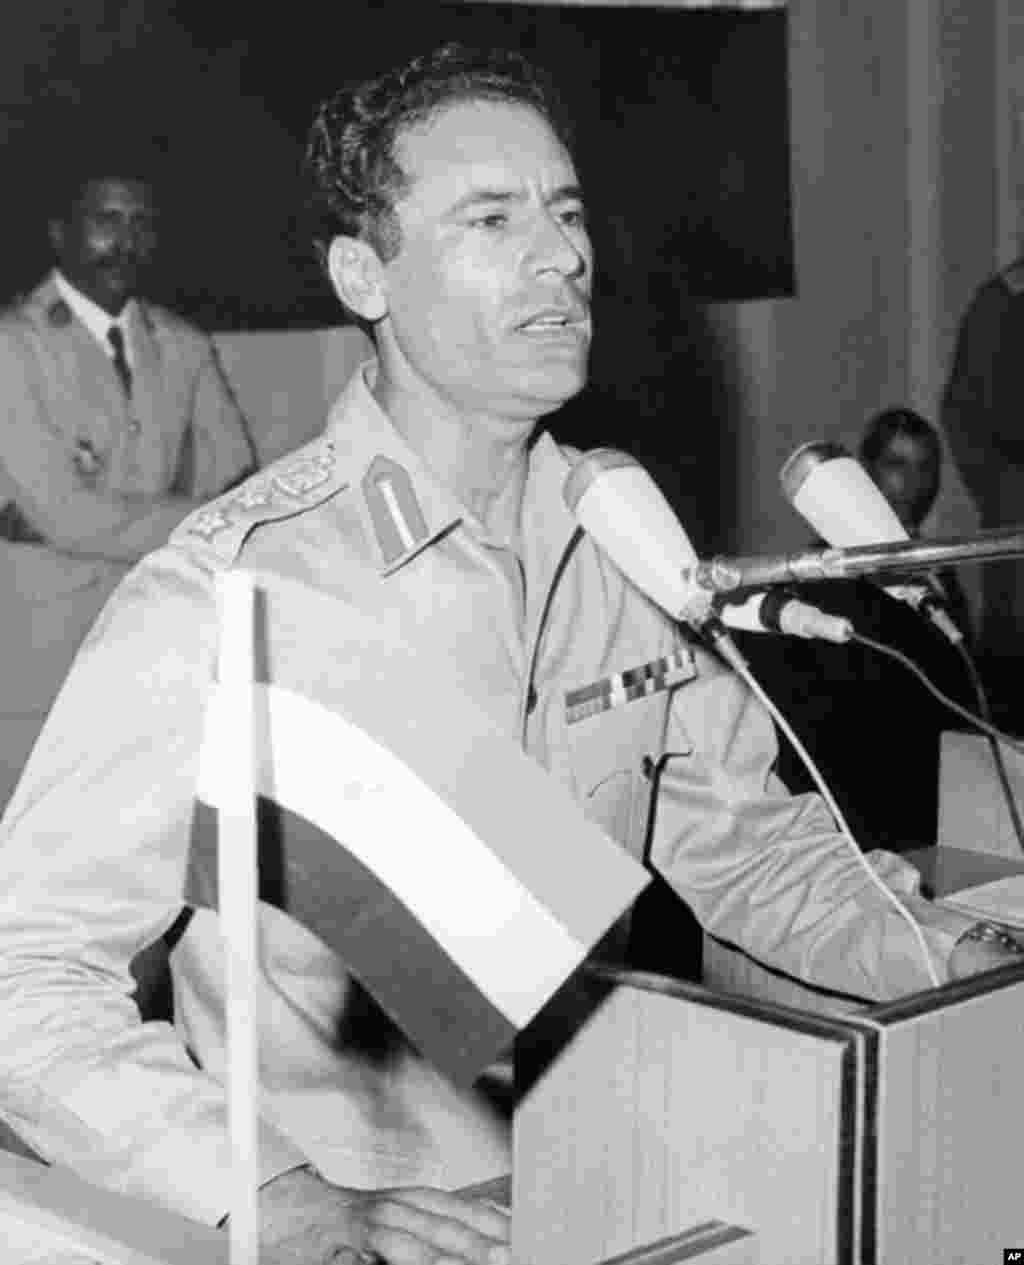 Libyan Head of State Colonel Moammar Gadhafi, born in 1942, formed in 1963 the Free Officers Movement, a group of revolutionary army officers, which overthrew 01 September 1969 King Idris of Libya and proclaimed Libya, in the name of "freedom, socialism a